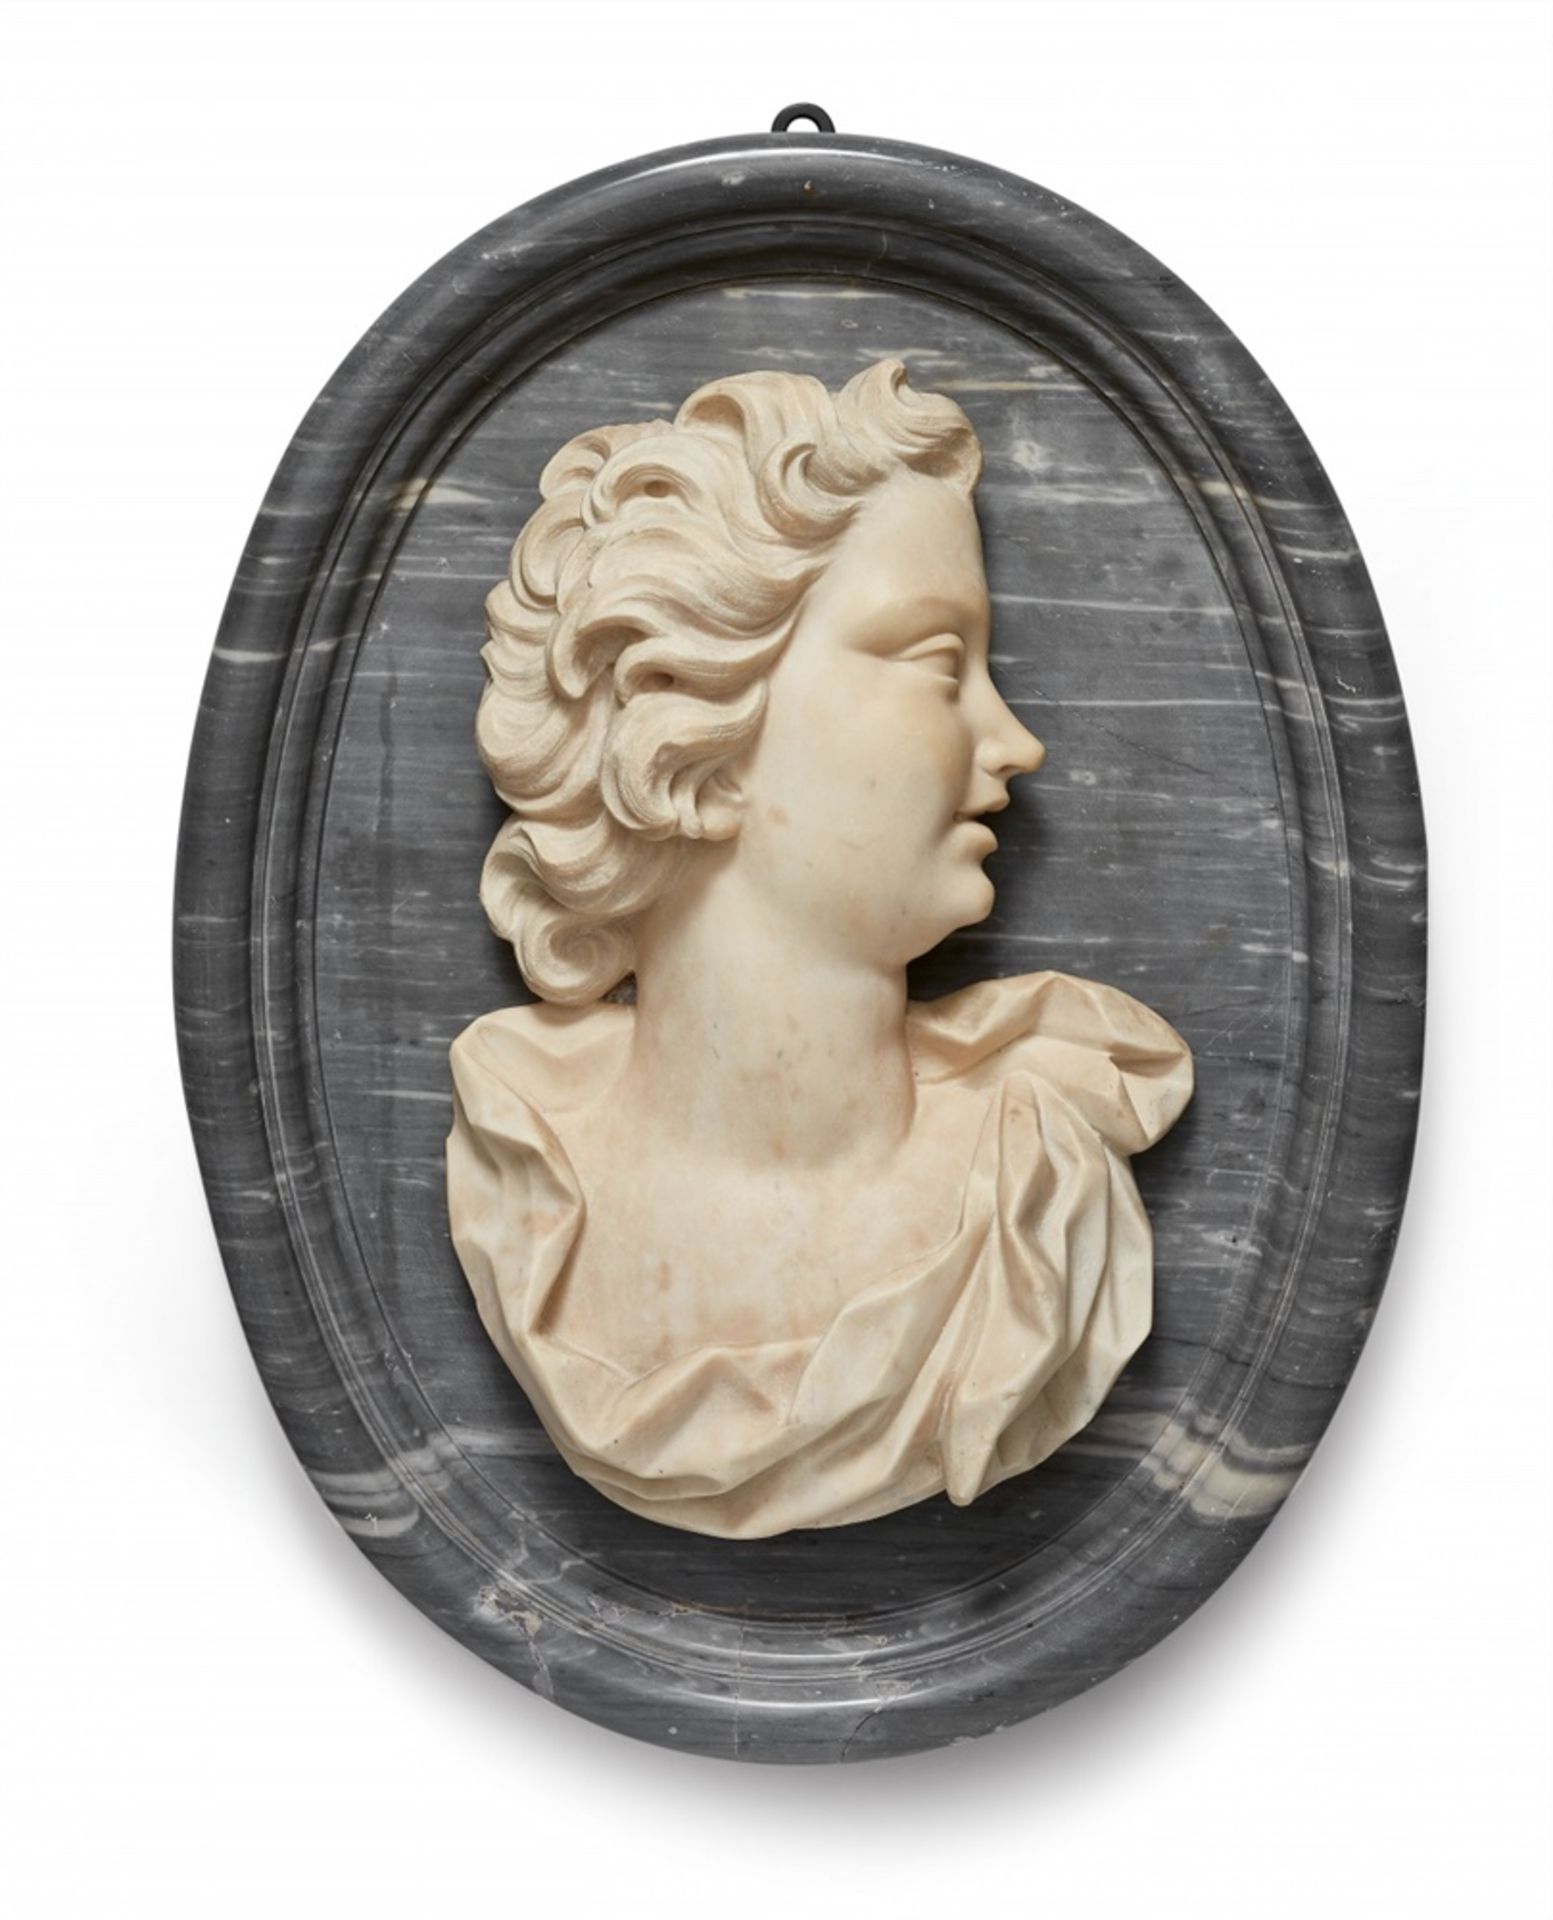 An androgynous relief bustWhite and pale marble bust of a figure with flowing locks facing right